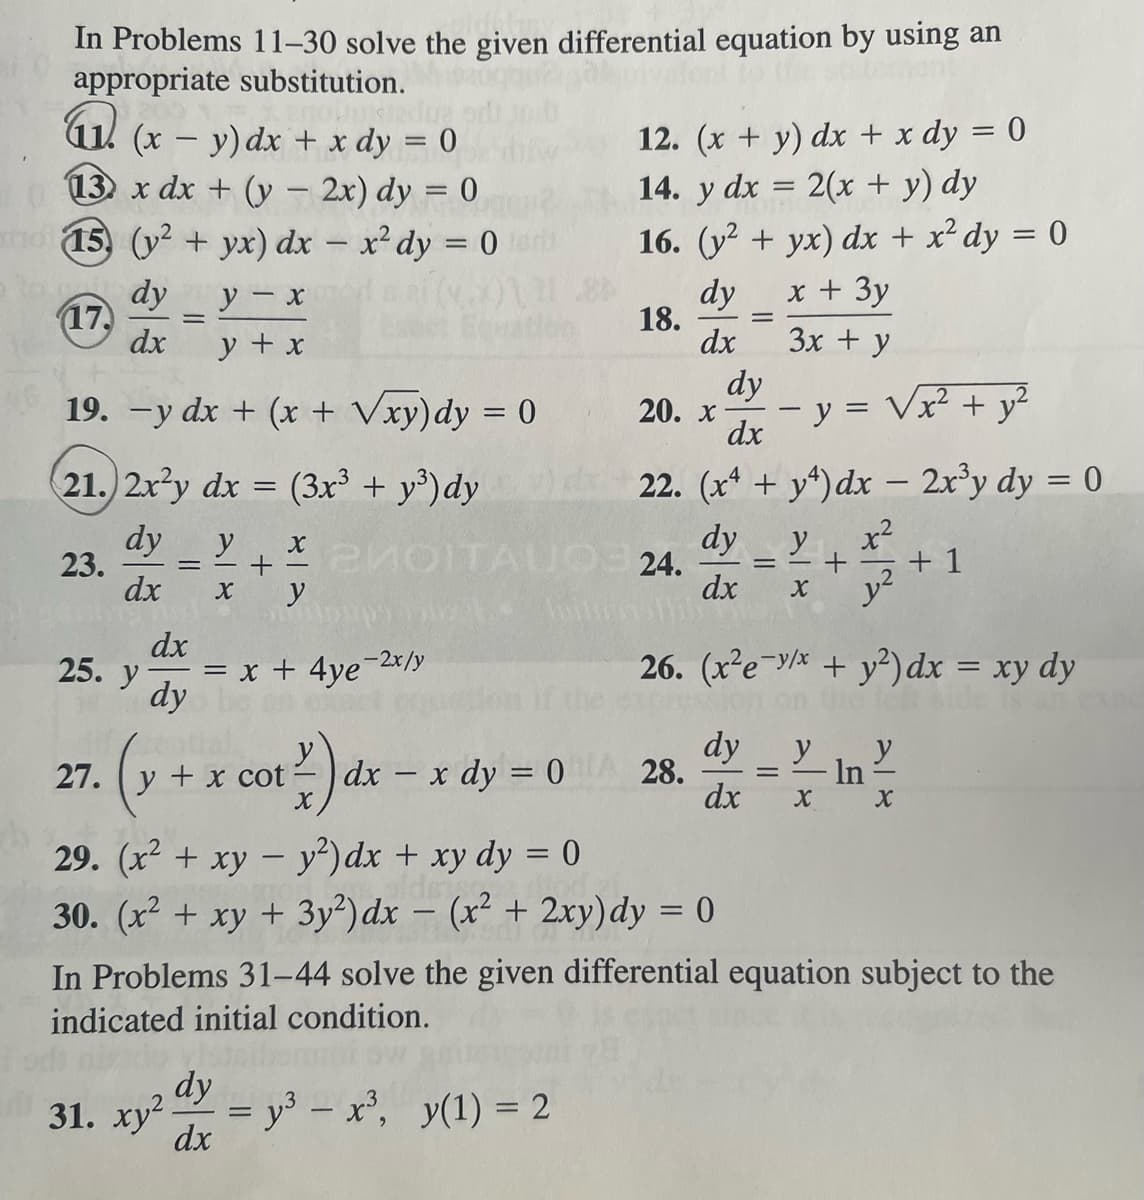 In Problems 11-30 solve the given differential equation by using an
appropriate substitution.
M.
(x - y) dx + x dy = 0
013) x dx + (y - 2x) dy = 0
(15) (y² + yx) dx = x² dy = 0
y - x
dy
17. =
dx
y + x
19. -y dx + (x + √xy)dy = 0
21.) 2x2y dx = (3x³ + y³) dy
dy
dx X
23.
25. y
=
dx
dy
y+201
X
y
у
2MOITAUO
pups 021
= x + 4ye
27. y + x cot
(x +
e-2x/y
117) d
31. xy² dy
dx
bittin
dx - x dy = 0
12. (x + y) dx + x dy = 0
14. y dx = 2(x + y) dy
16. (y² + yx) dx + x² dy = 0
dy x + 3y
3x + y
18. =
dx
dy
20. x - y = √x² + y²
dx
22. (x4 + y4) dx - 2x³y dy = 0
dy y
x²
dx
X
= y³ - x³, y(1) = 2
24.
28.
29. (x² + xy - y²) dx + xy dy = 0
30. (x² + xy + 3y2) dx = (x² + 2xy) dy = 0
-
=
dy
dx X
+
26. (x²e-v/x + y²) dx = xy dy
is an
y²
= In
+1
X
In Problems 31-44 solve the given differential equation subject to the
indicated initial condition.